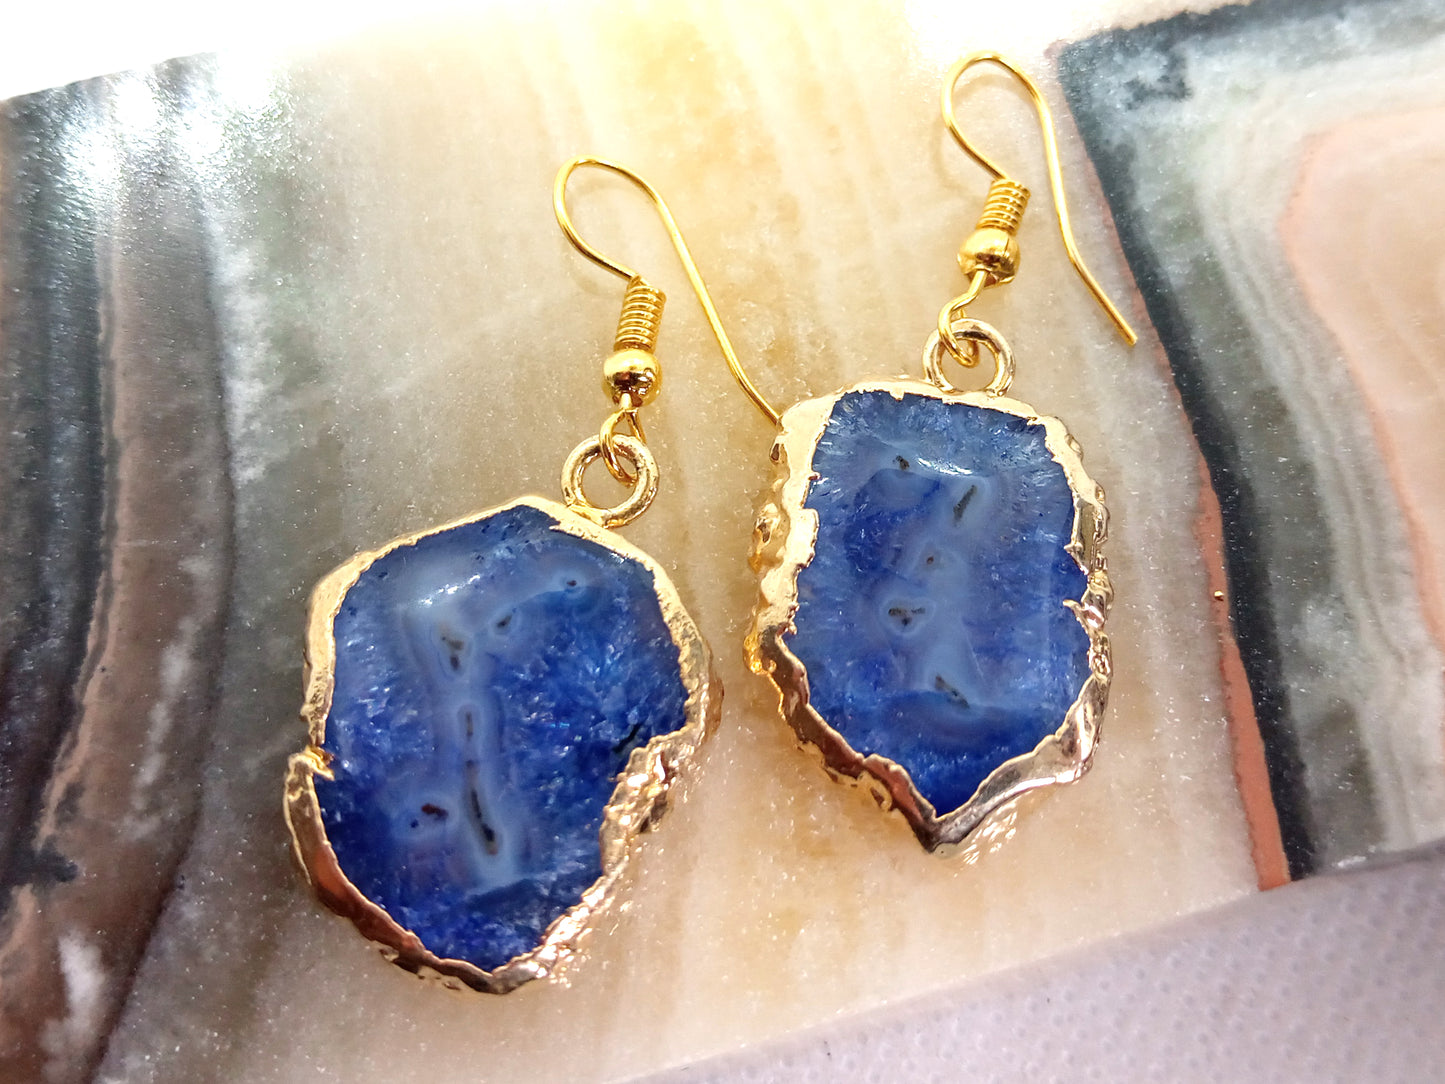 Gold-plated earrings with blue agate